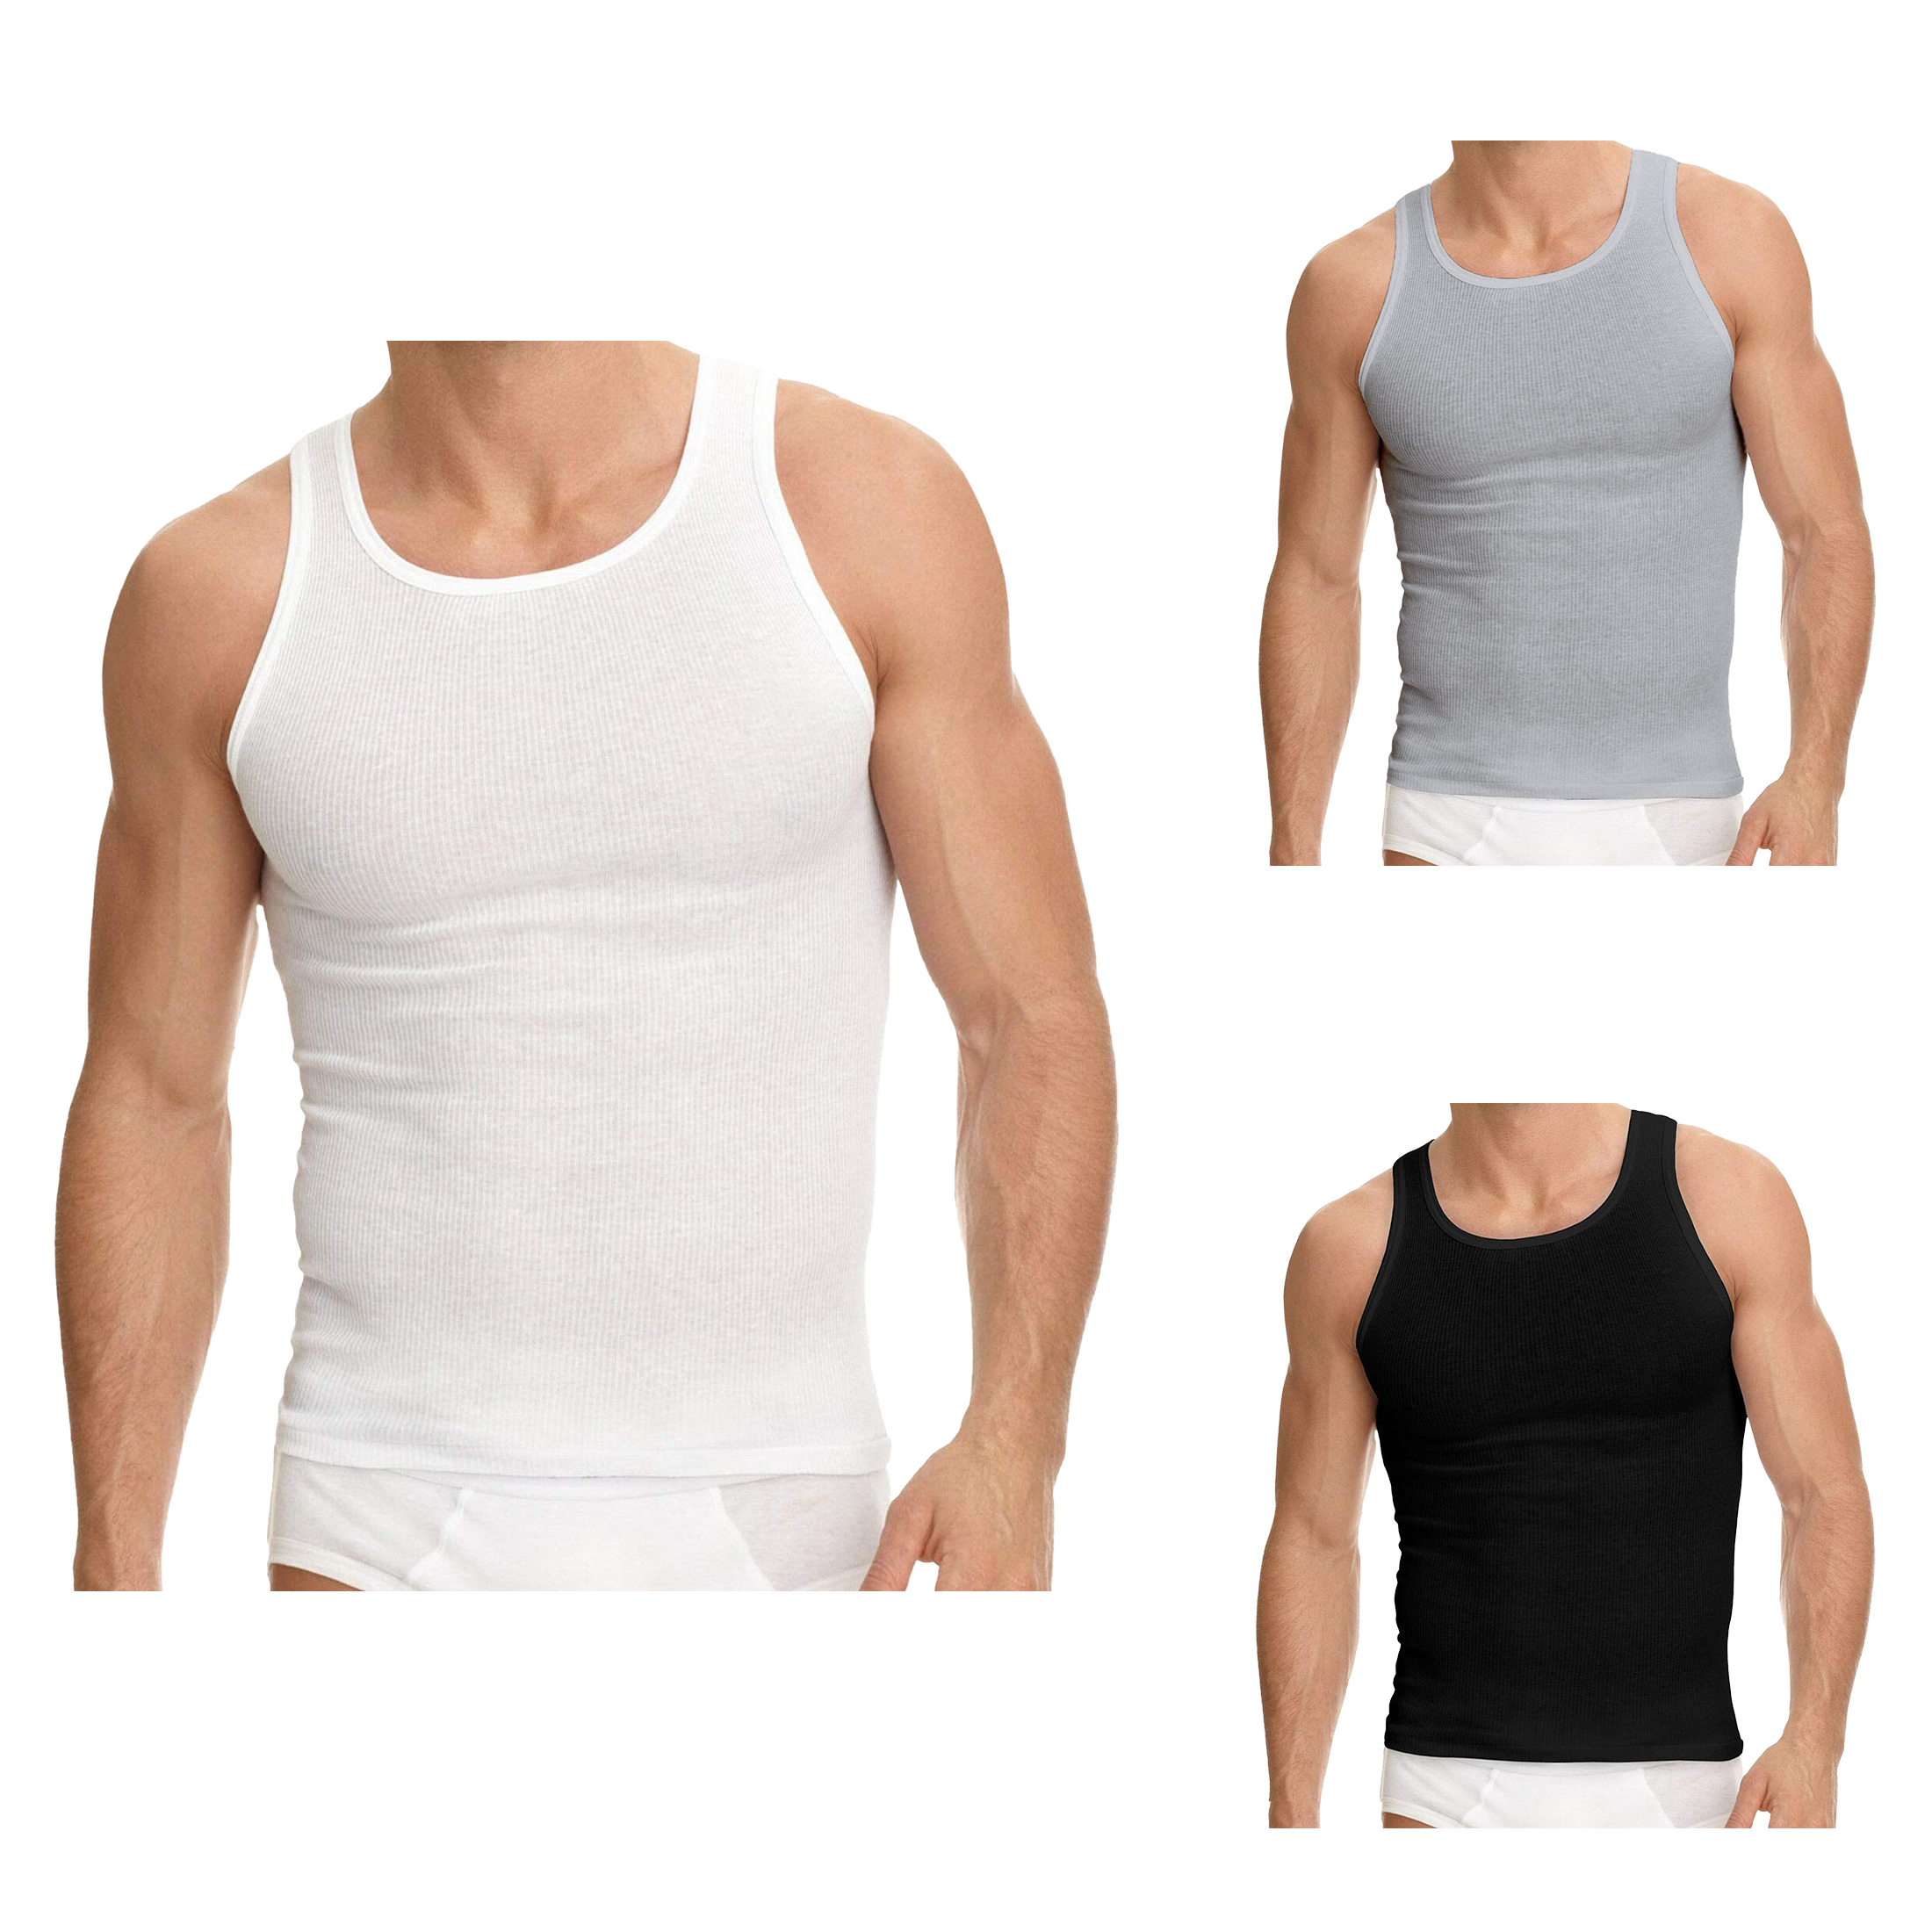 12-Pack: Men's Solid Cotton Soft Ribbed Slim-Fitting Summer Tank Tops - Assorted, Medium